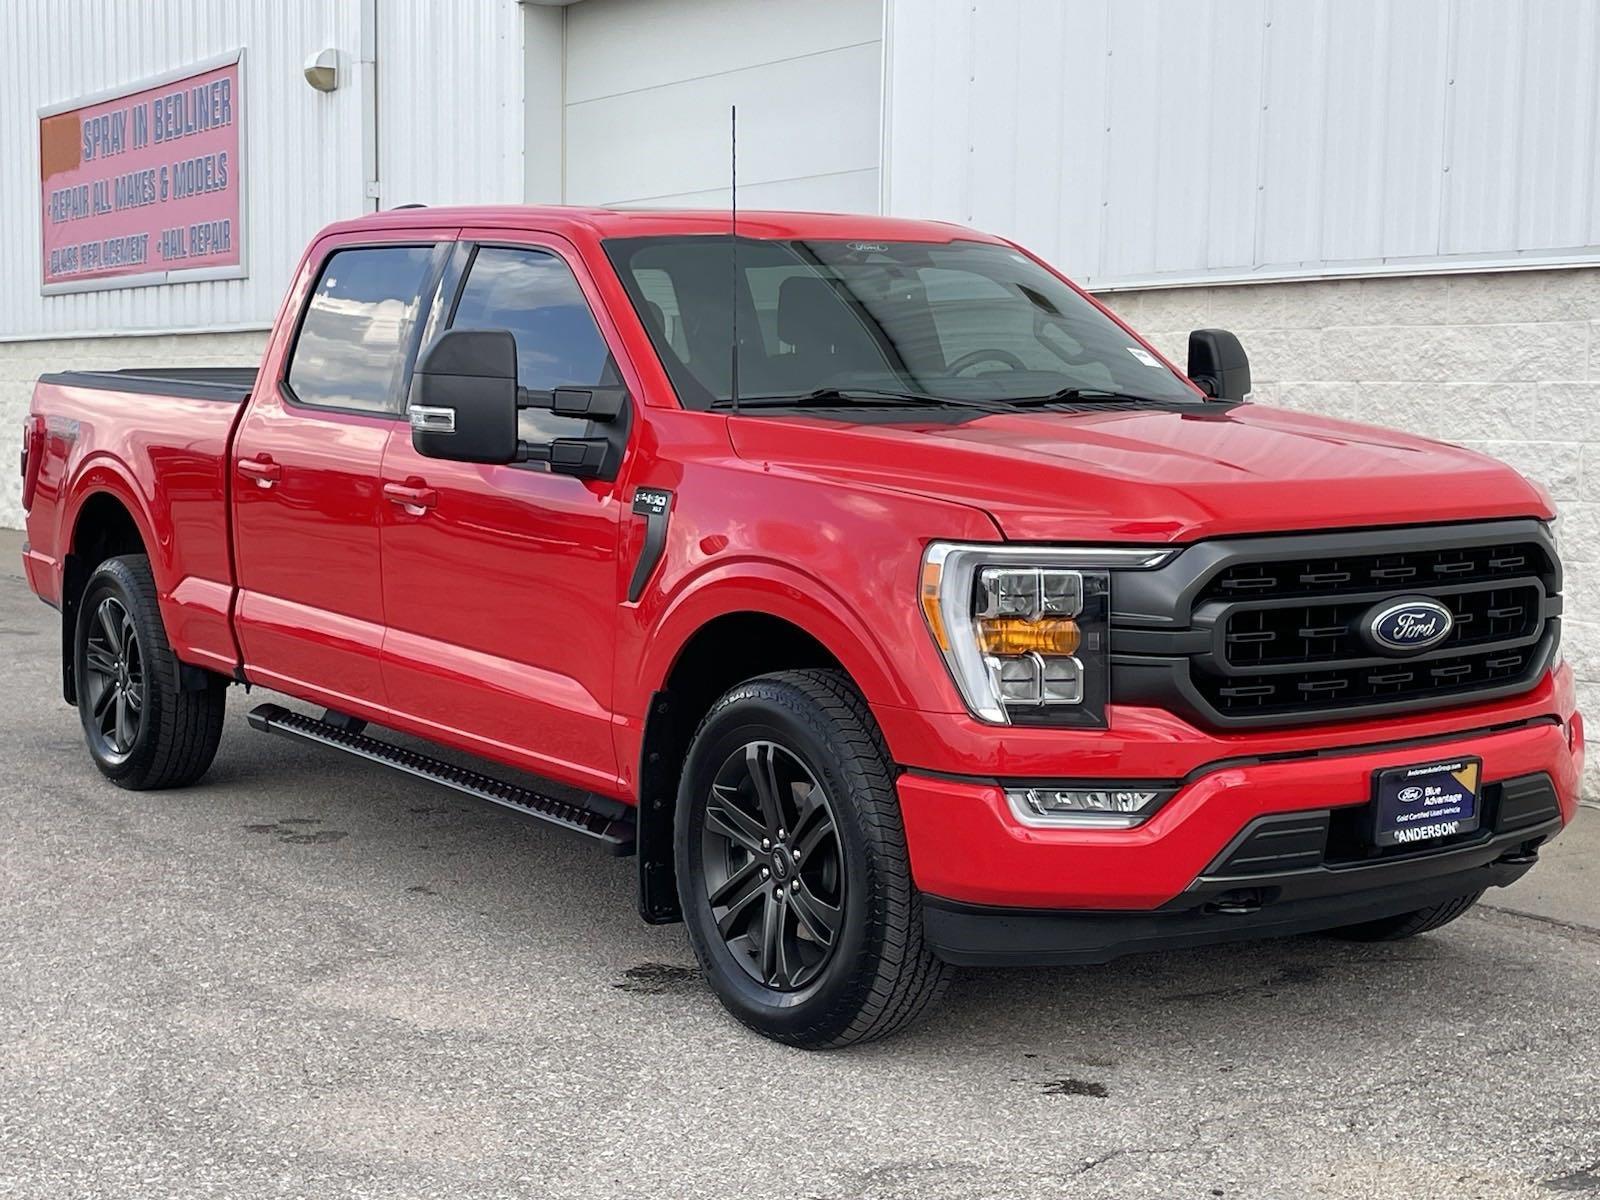 Used 2021 Ford F-150 XLT SuperCrew Cab Styleside for sale in Lincoln NE